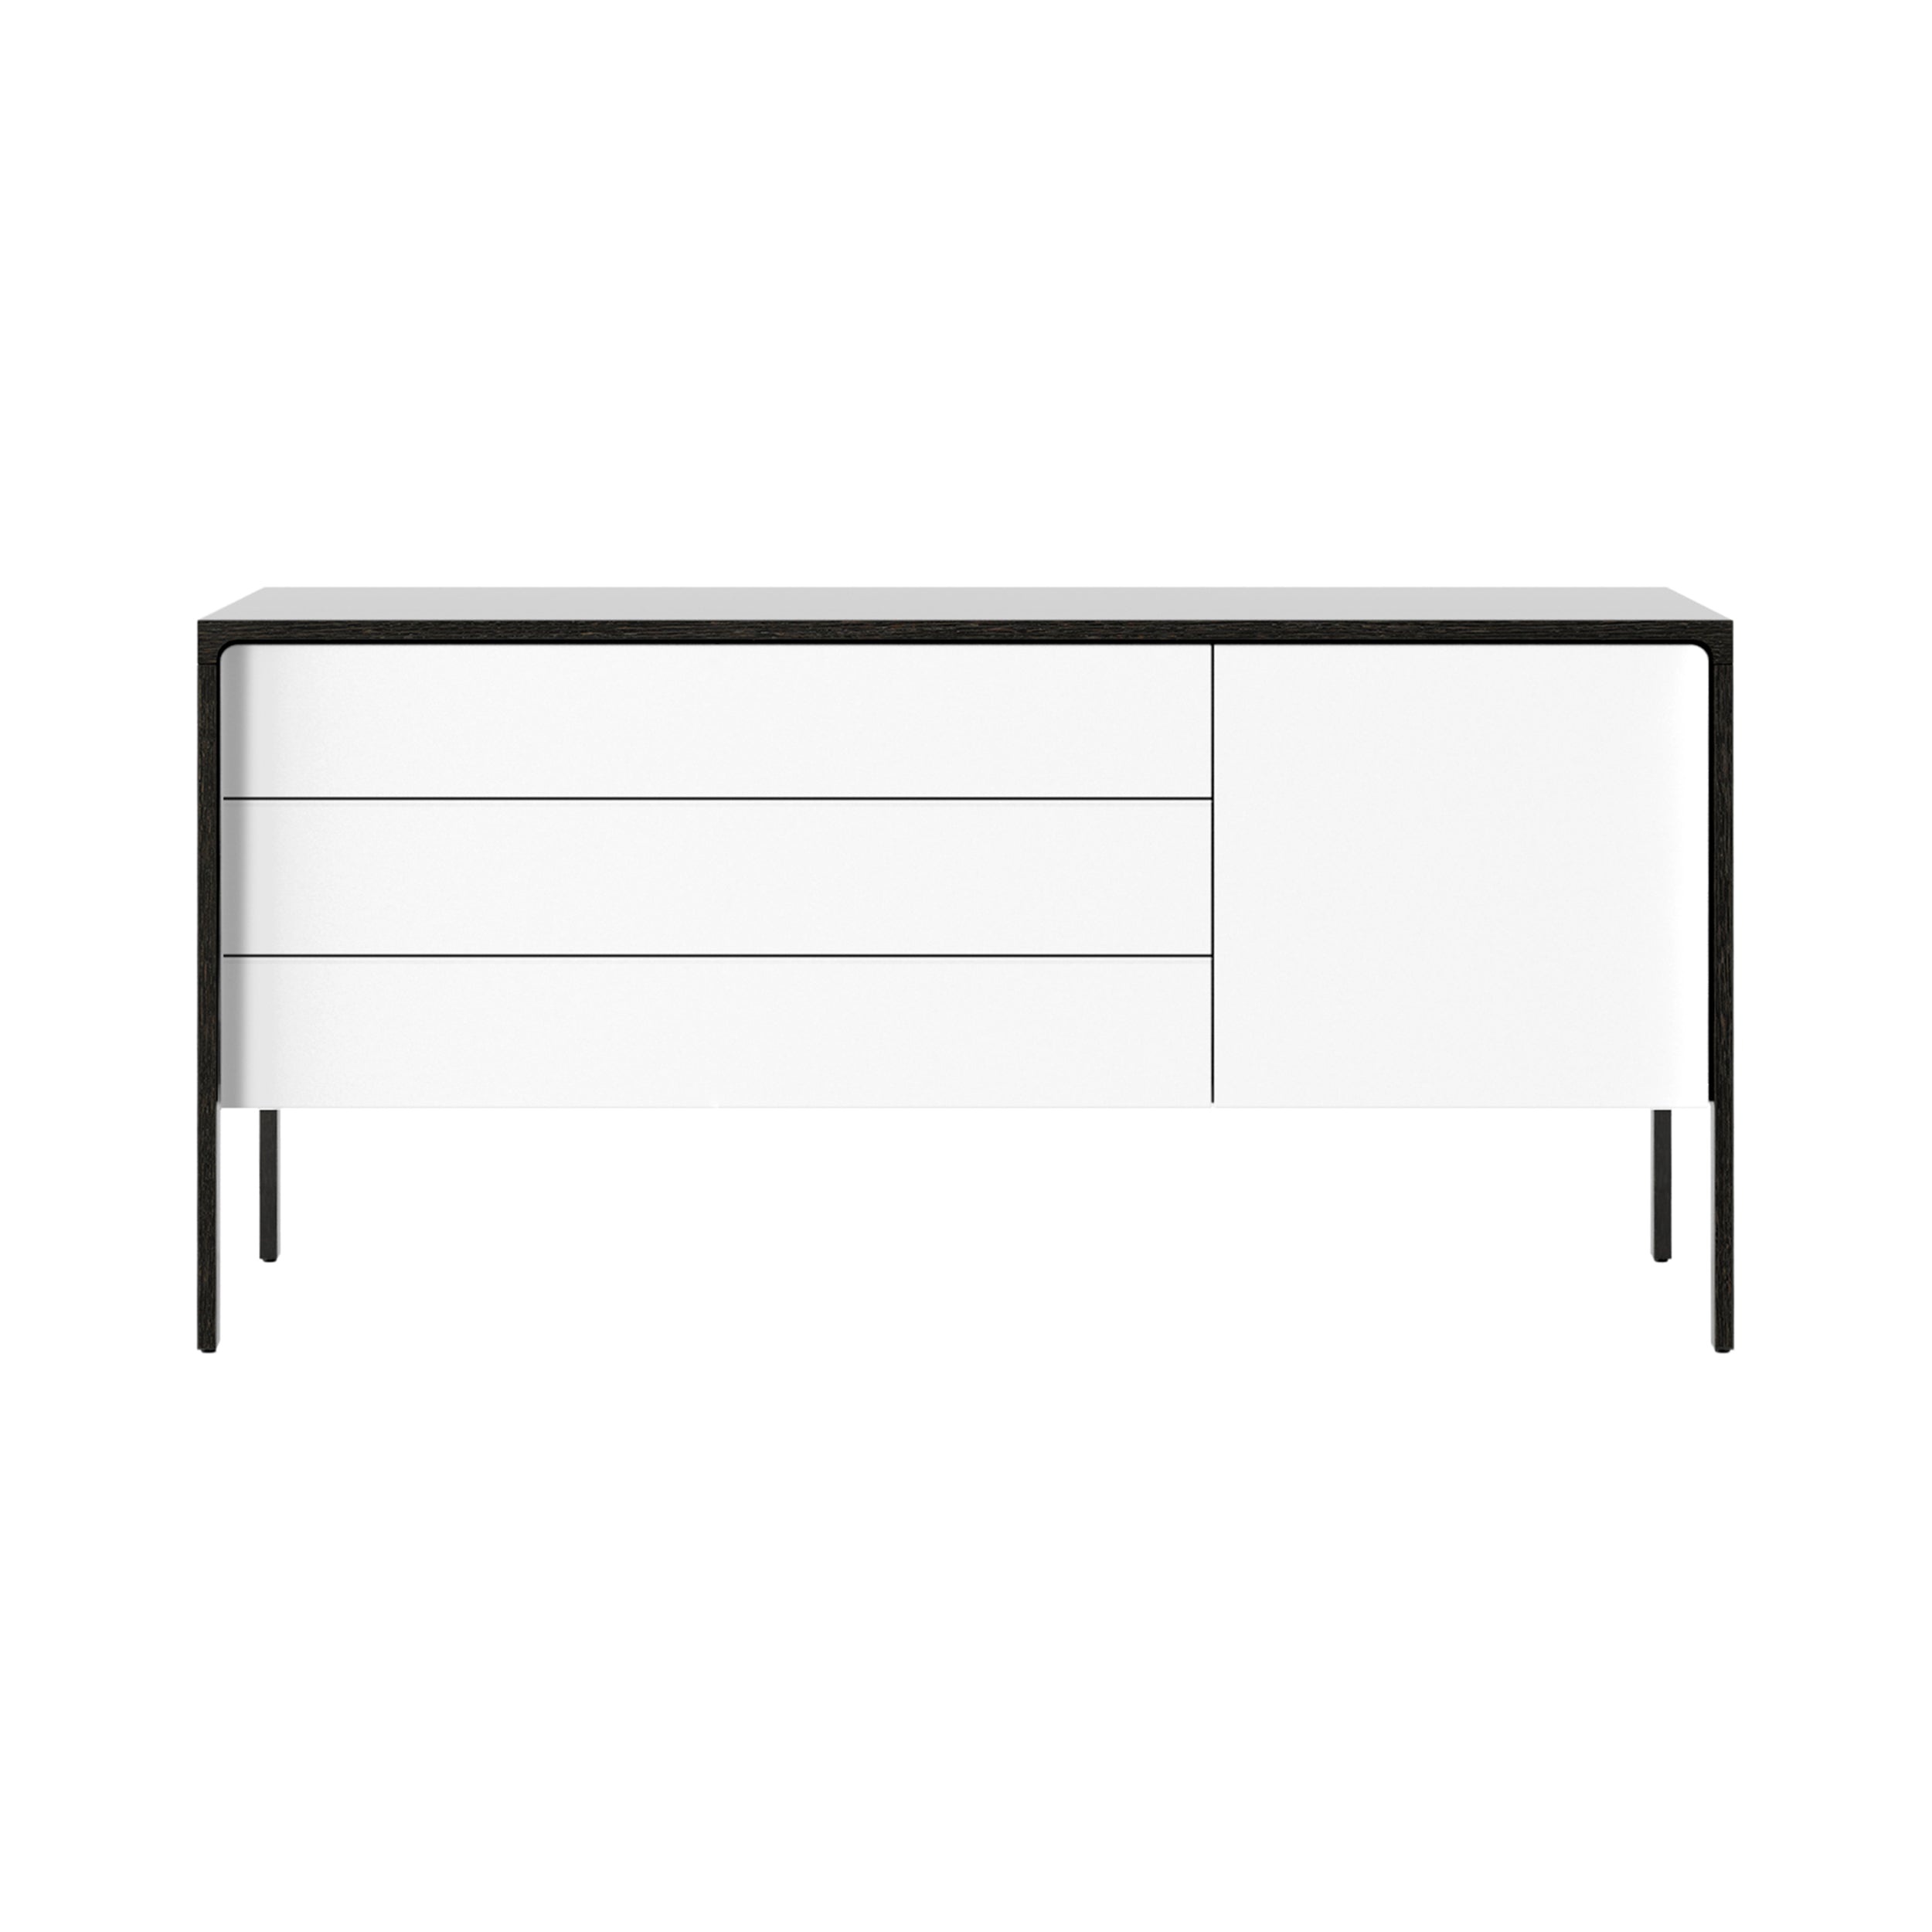 Tactile Sideboard: TAC211 + White Texturised Lacquered + Dark Grey Stained Oak